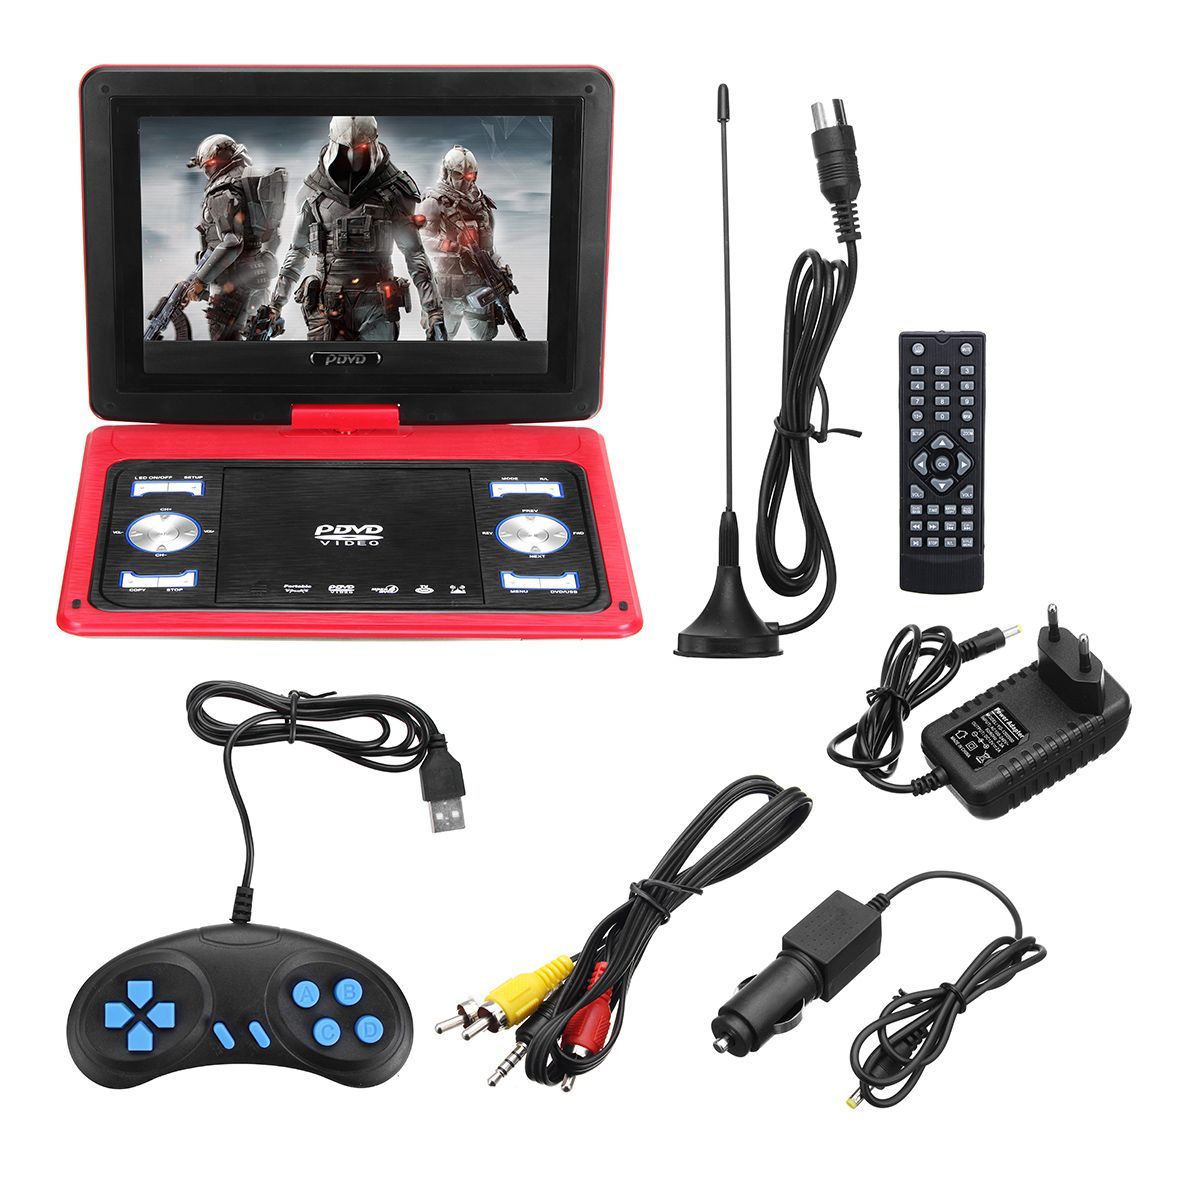 138-Inch-Portable-Car-DVD-Player-EVD-TV-Game-Remote-Remote-Control-Screen-with-Gamepad-1620808